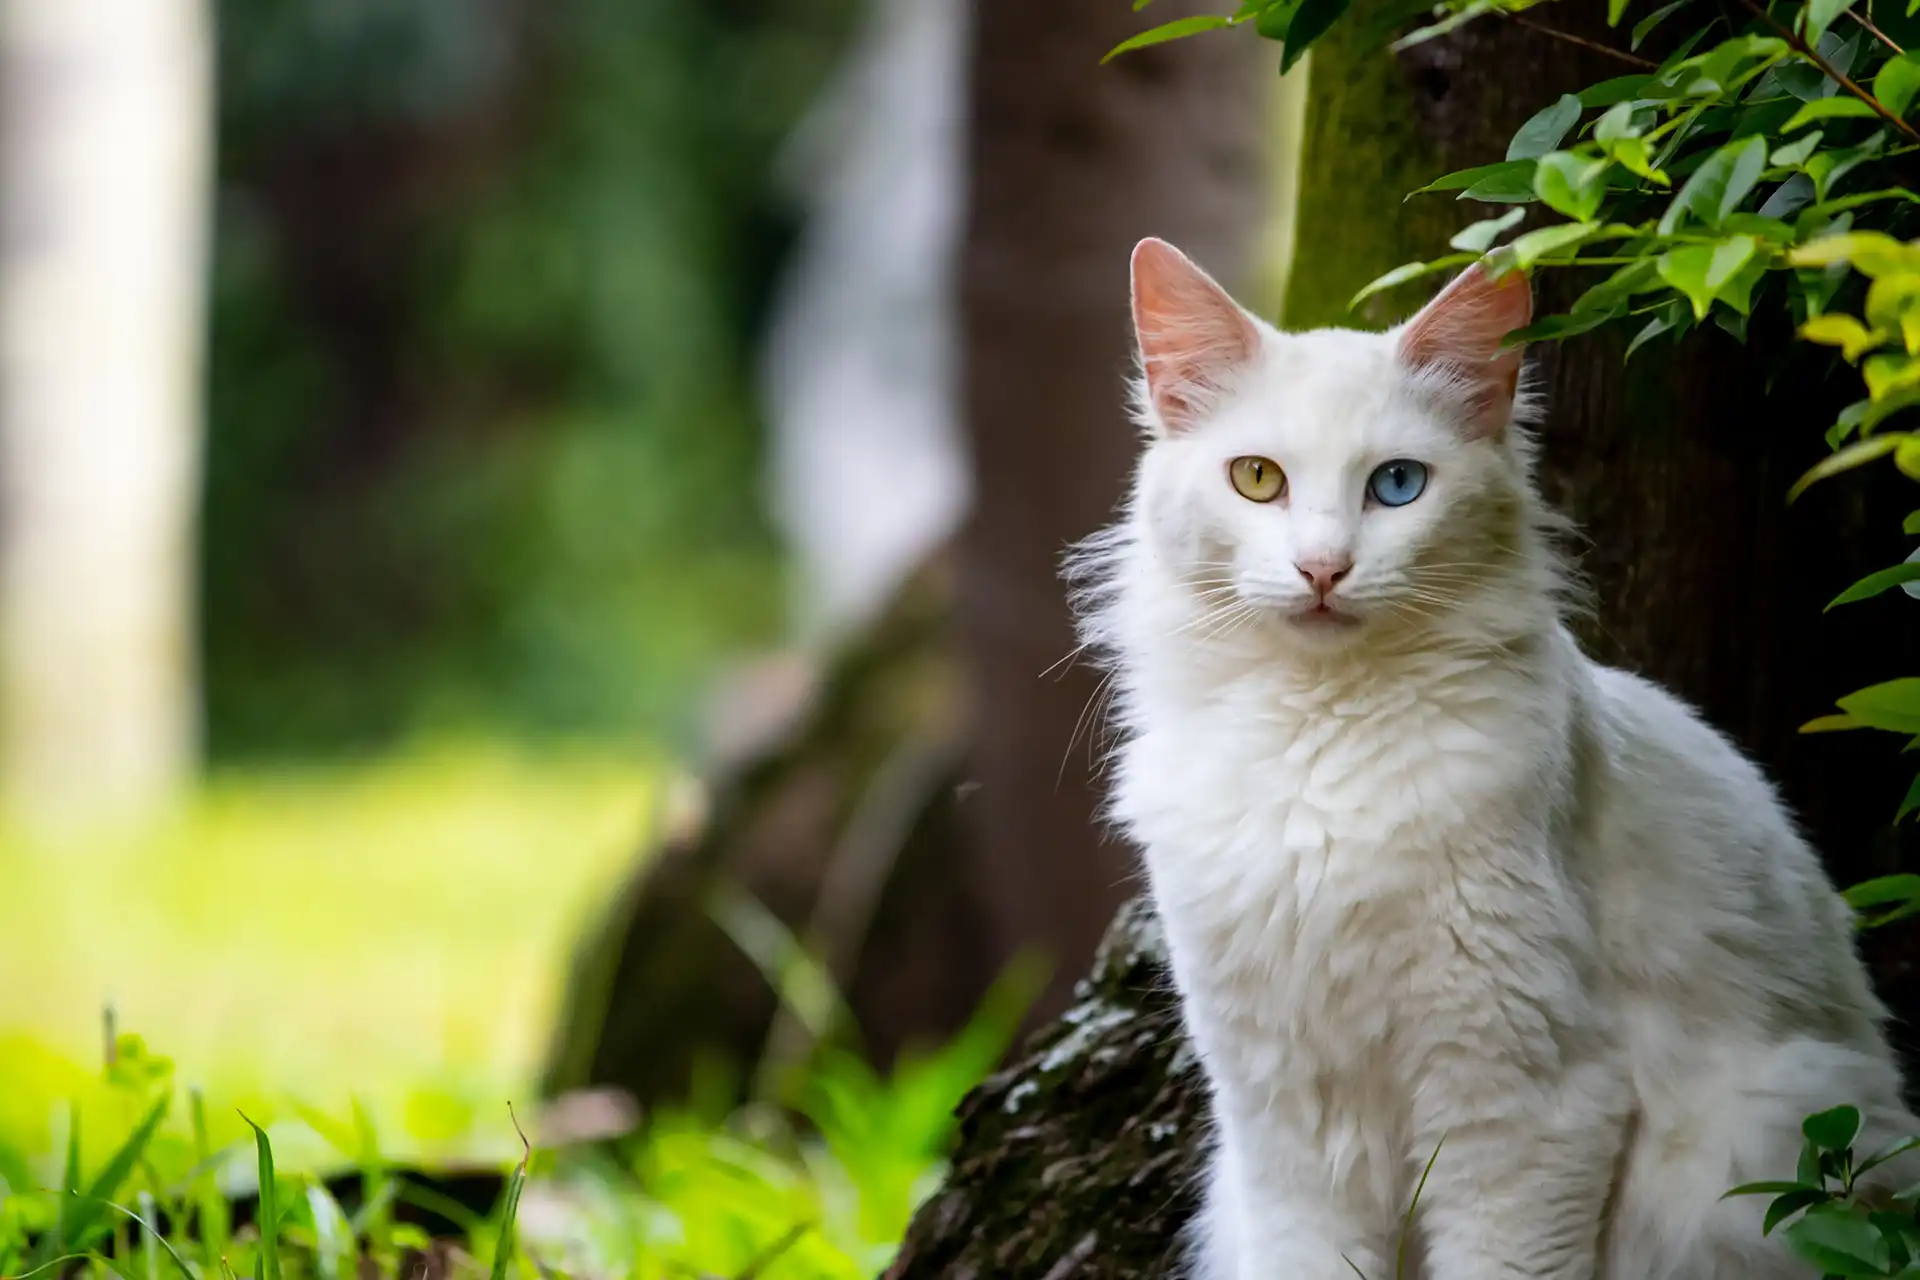 White cat with two different eye colors